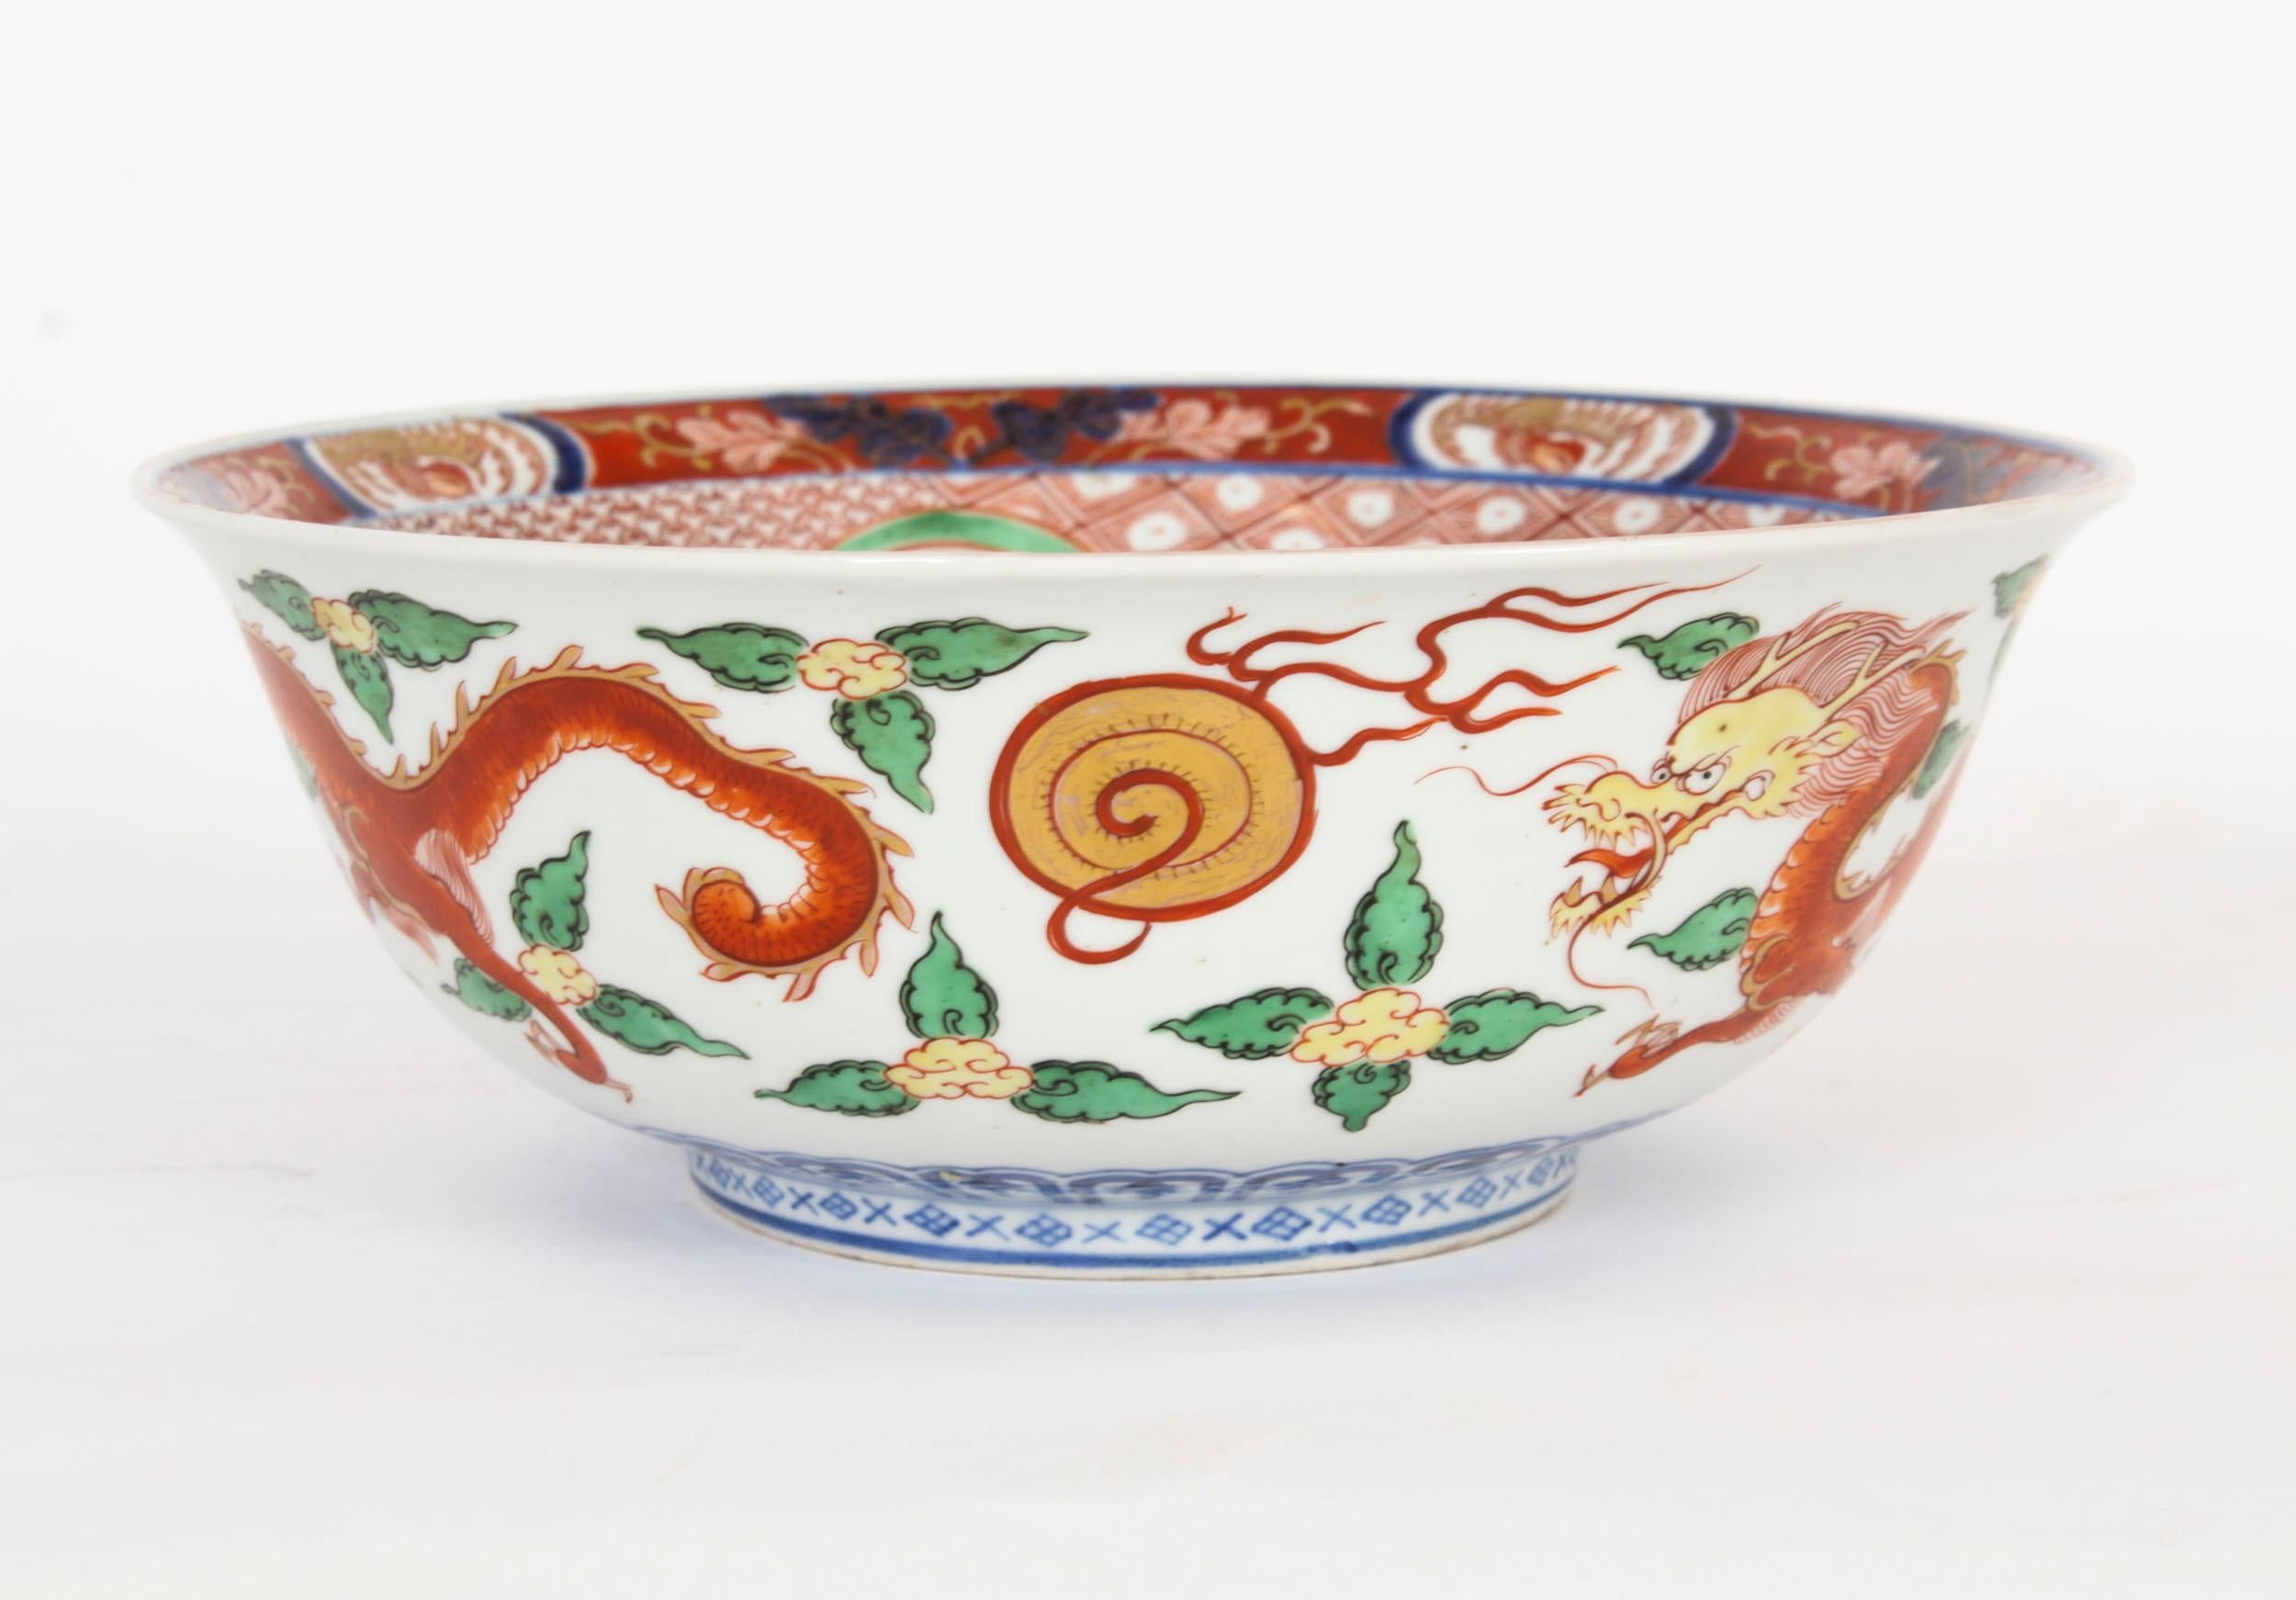 Antique Chinese Circular Imari Palette Porcelain Bowl, 19th Century In Good Condition For Sale In London, GB